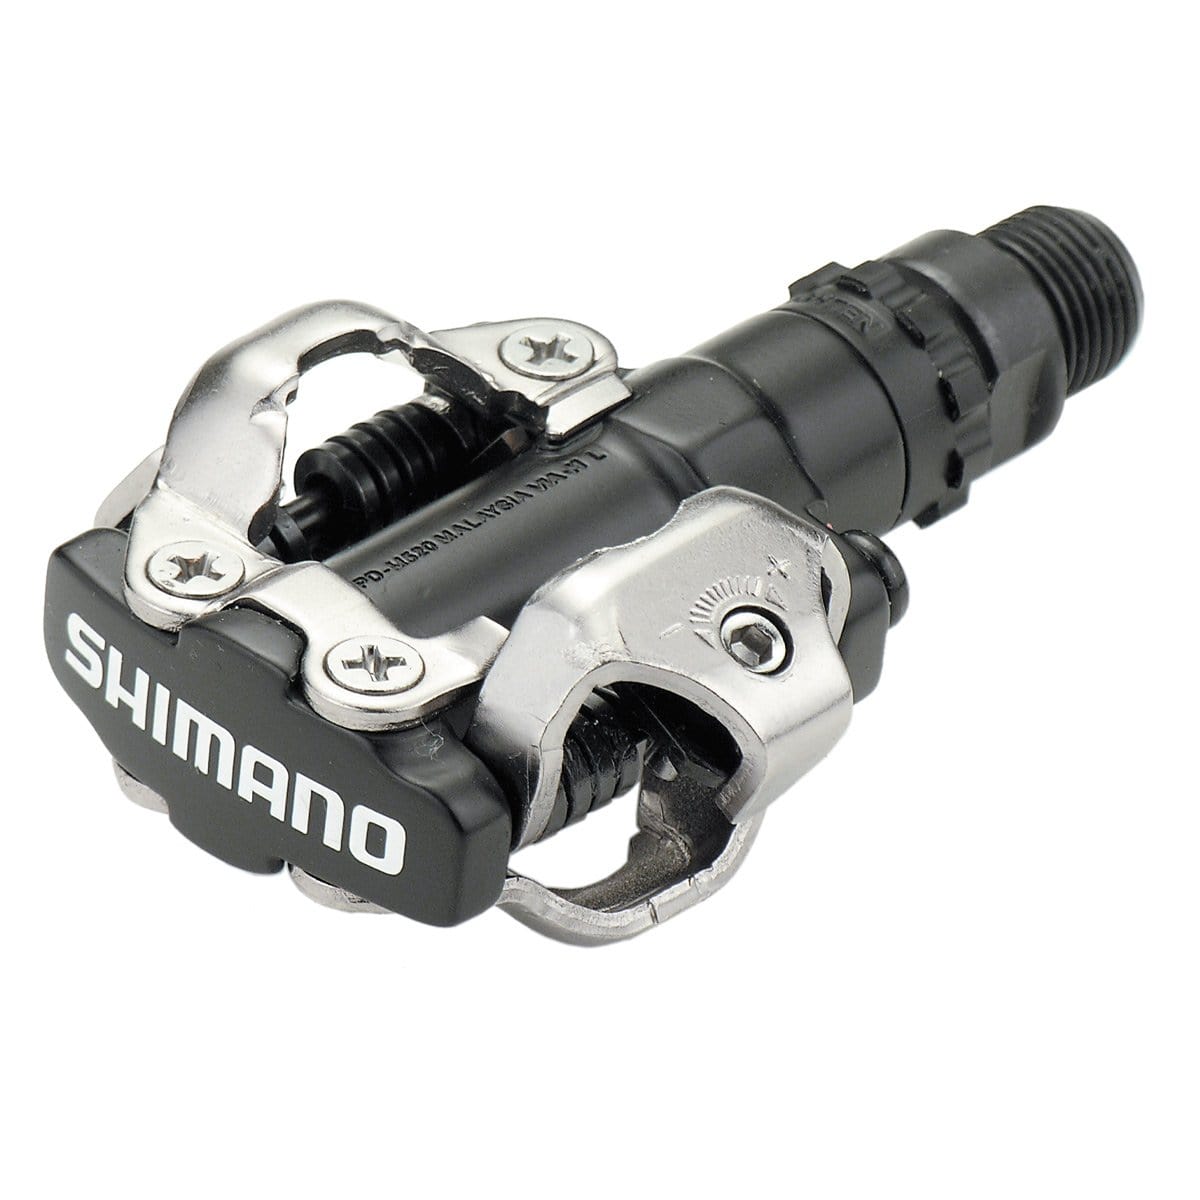 Shimano off road pedal SPD-M520